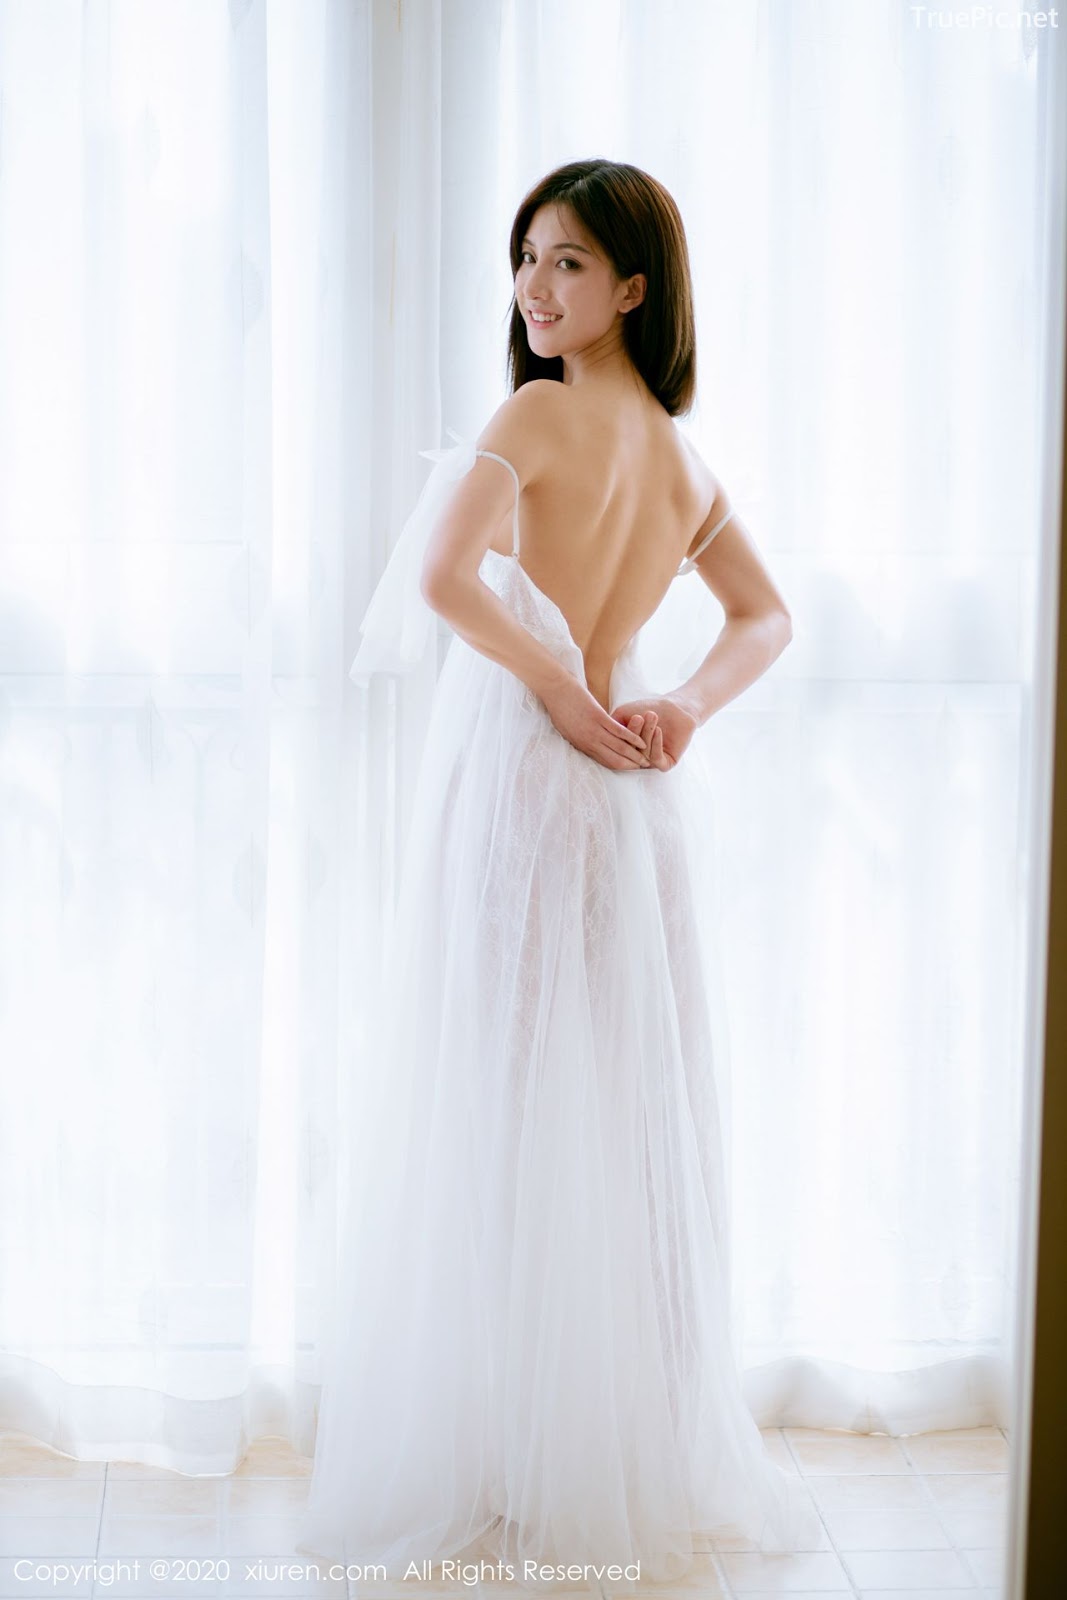 XIUREN No.1914 - Chinese model 林文文Yooki so Sexy with Transparent White Lace Dress - Picture 33